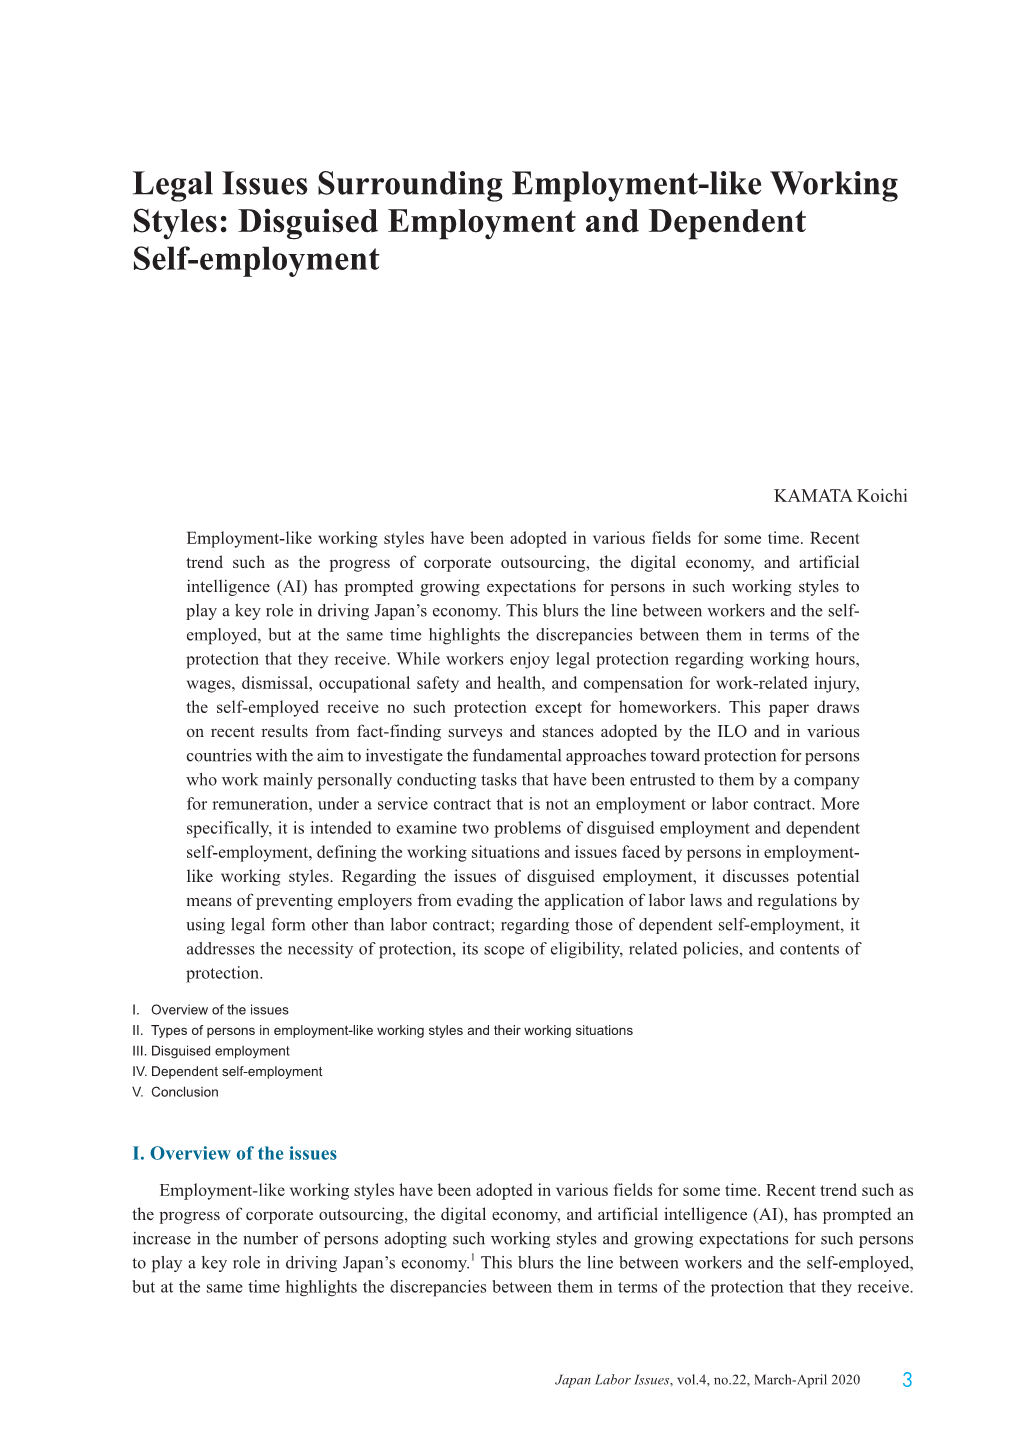 Legal Issues Surrounding Employment-Like Working Styles: Disguised Employment and Dependent Self-Employment